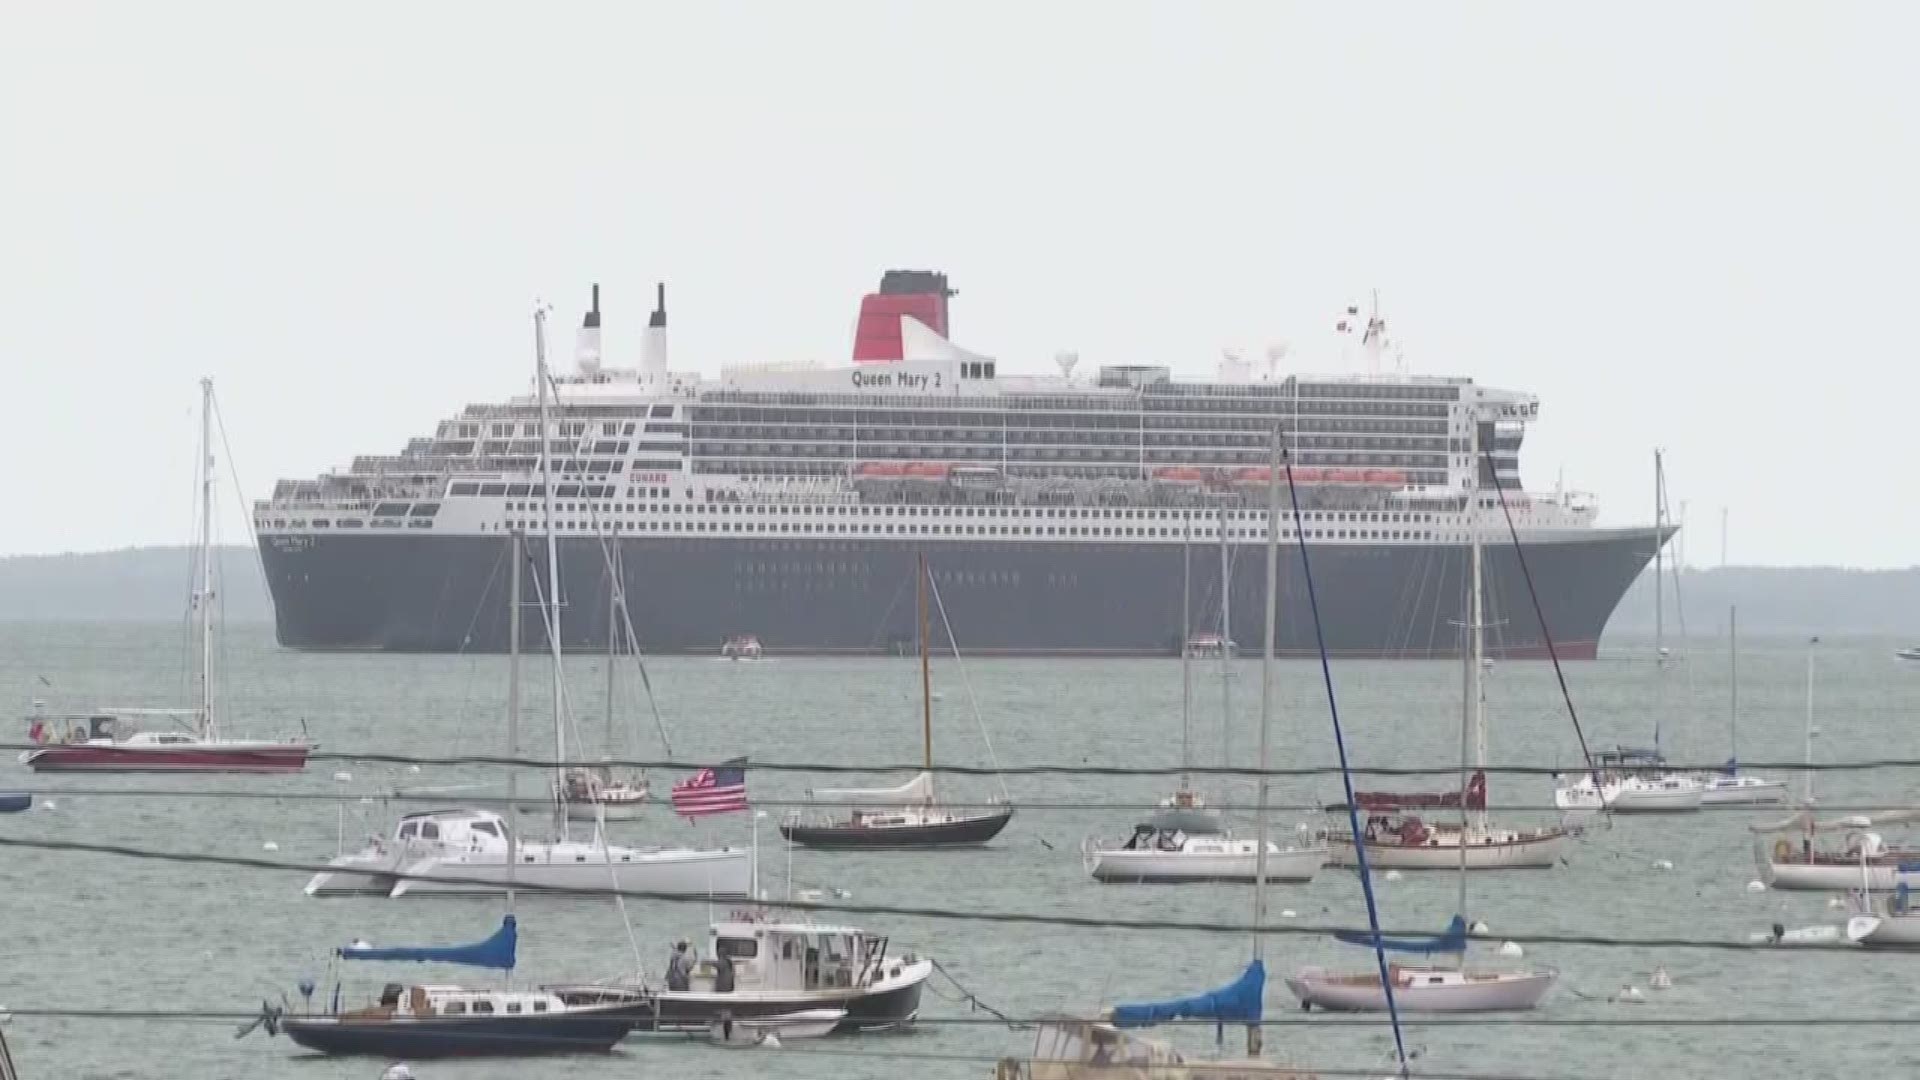 Queen Mary II drops anchor in Rockland